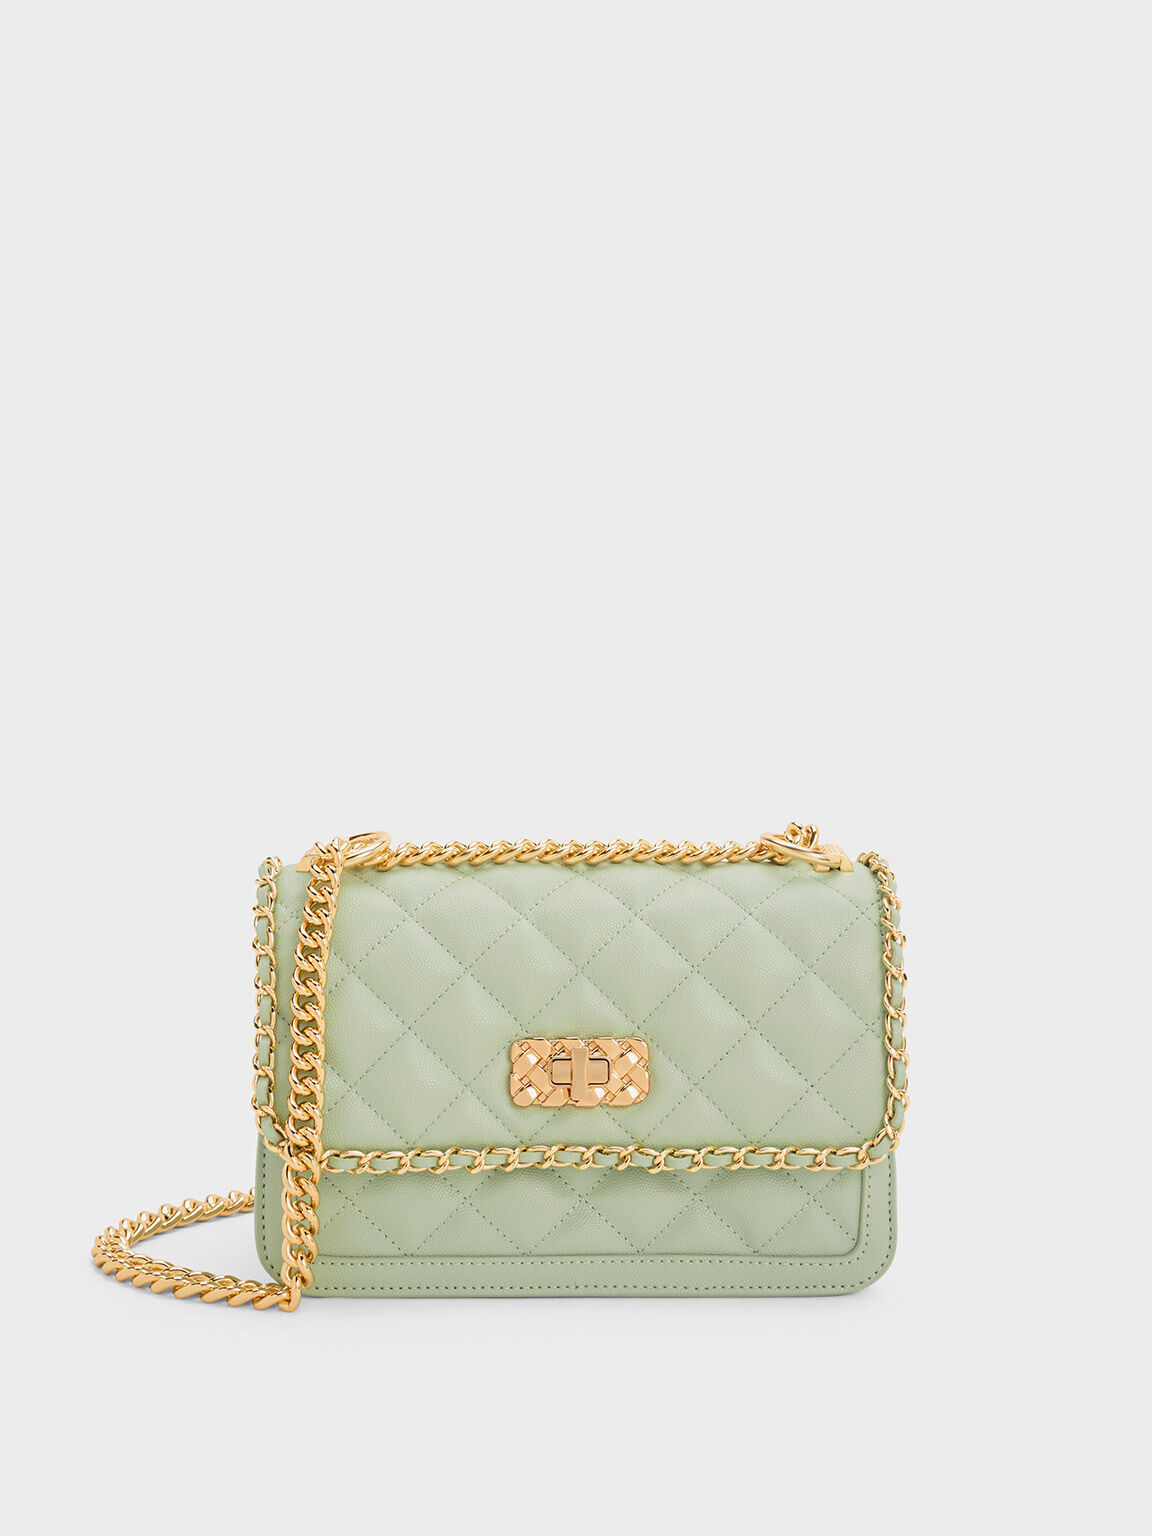 herder tieners correct Green Tas Chain Quilted Braided Micaela - CHARLES & KEITH ID